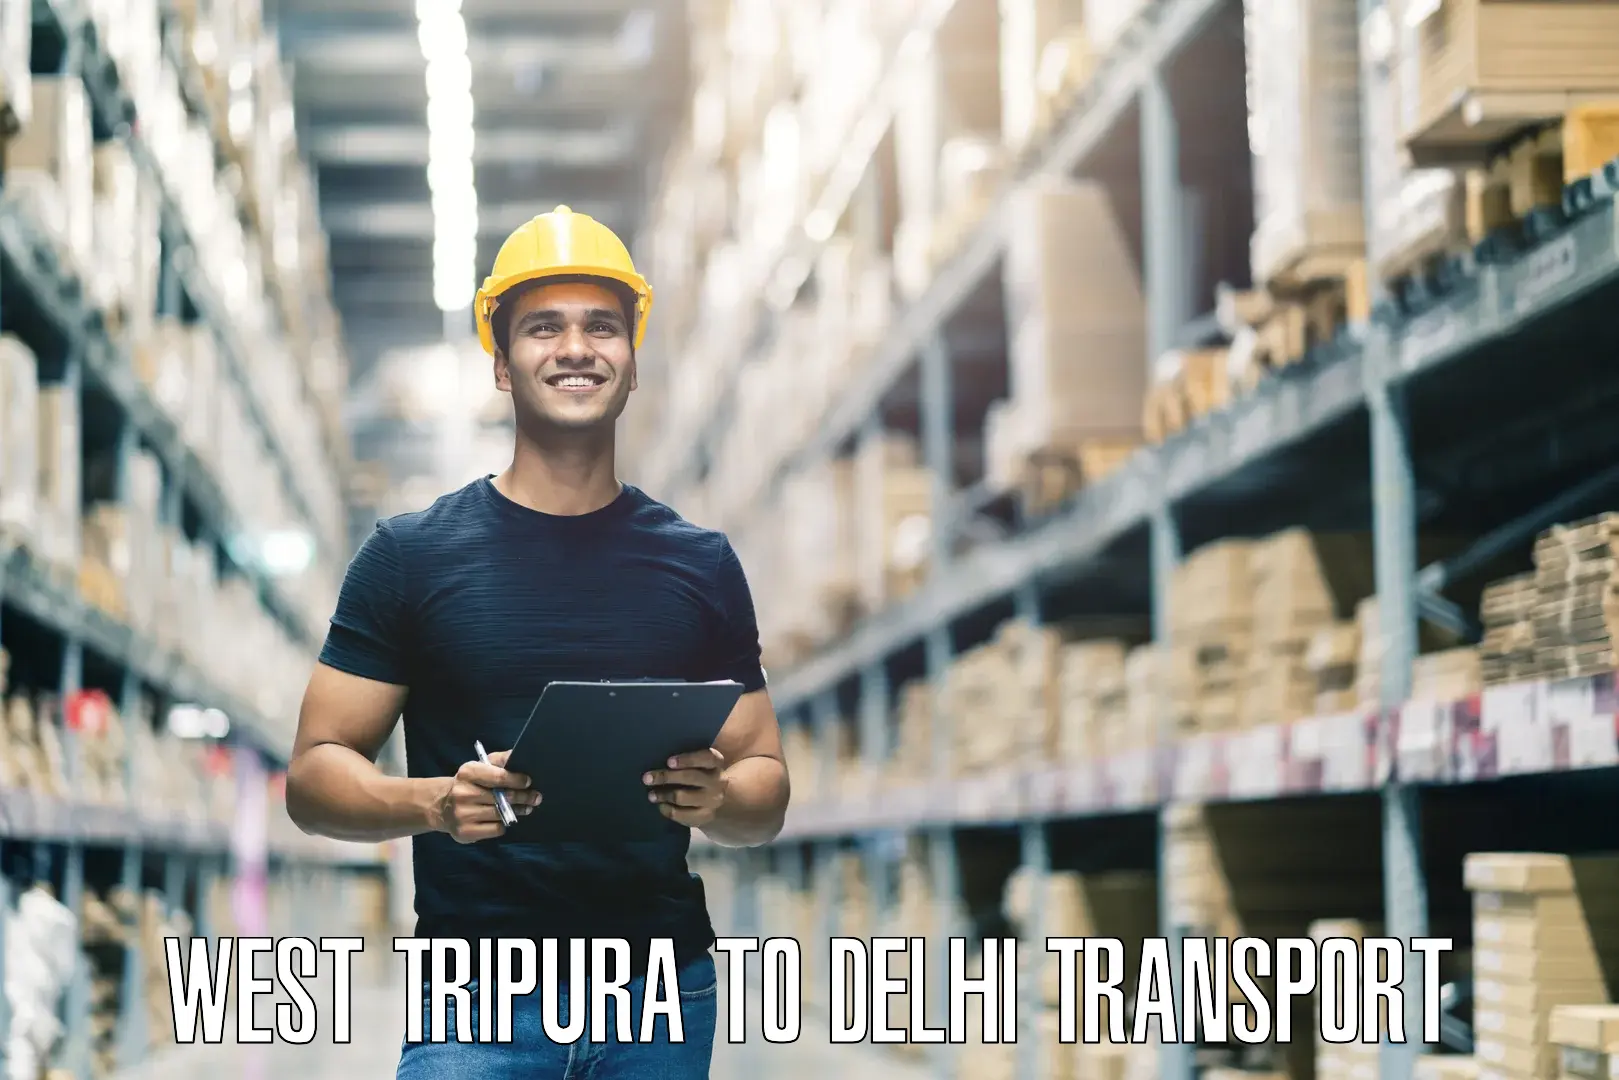 Daily transport service West Tripura to NCR